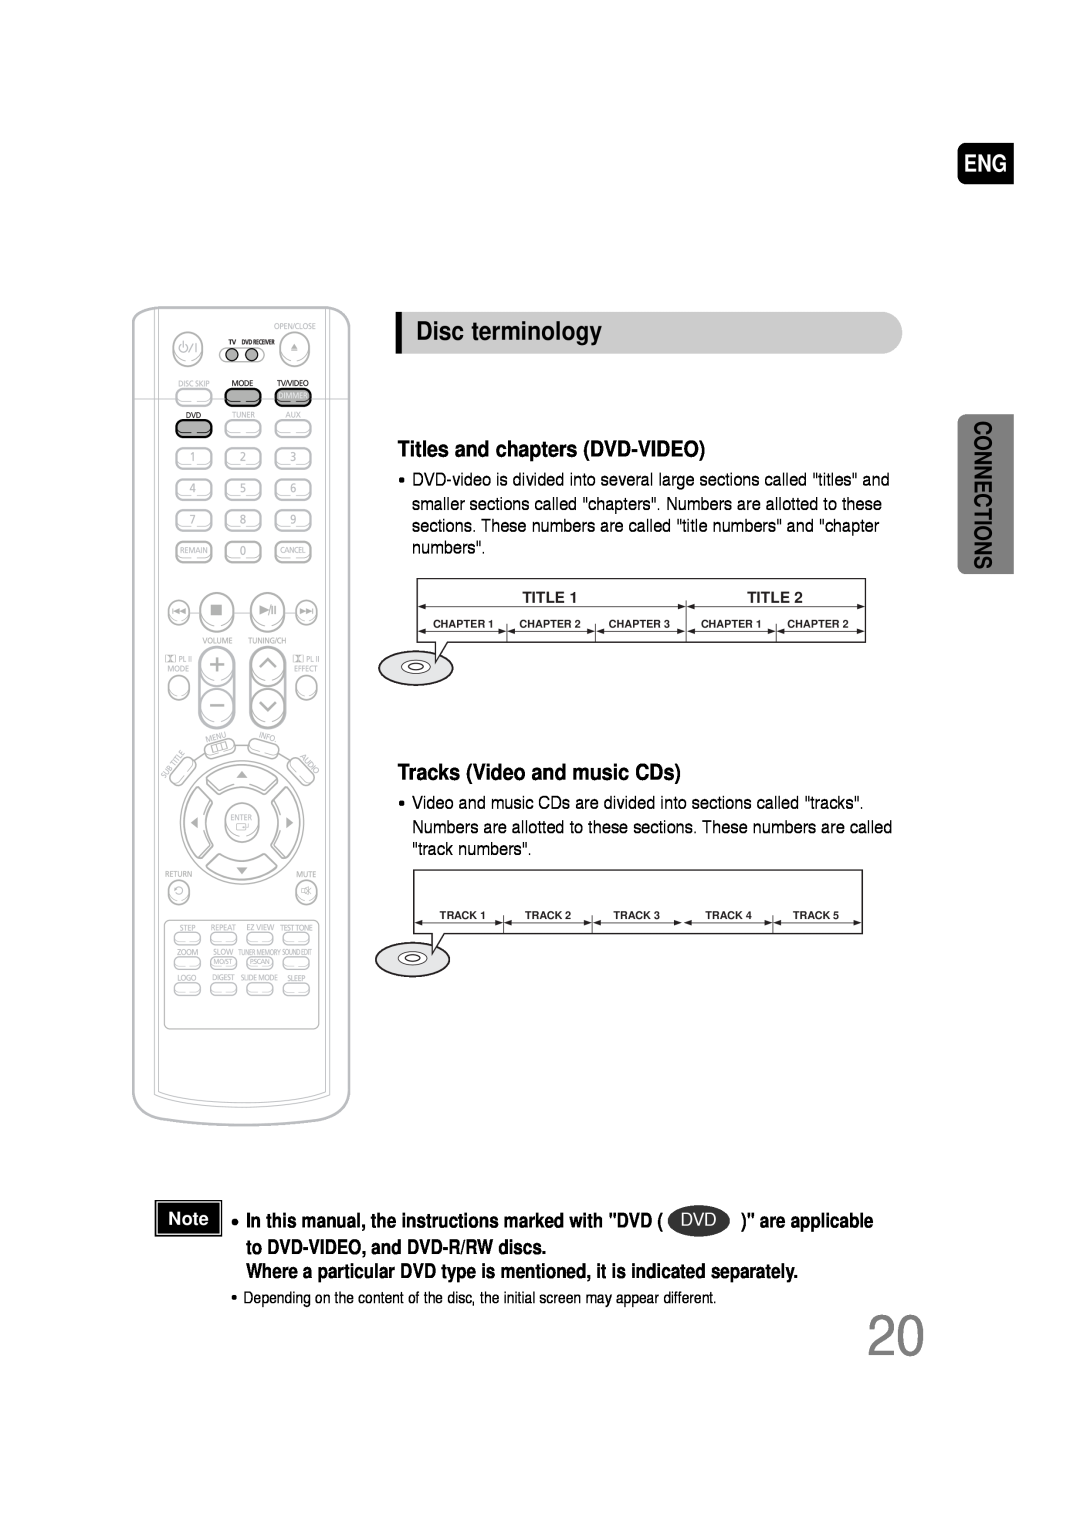 Samsung AH68-01701V manual Disc terminology, Titles and chapters DVD-VIDEO, Tracks Video and music CDs, Connections 